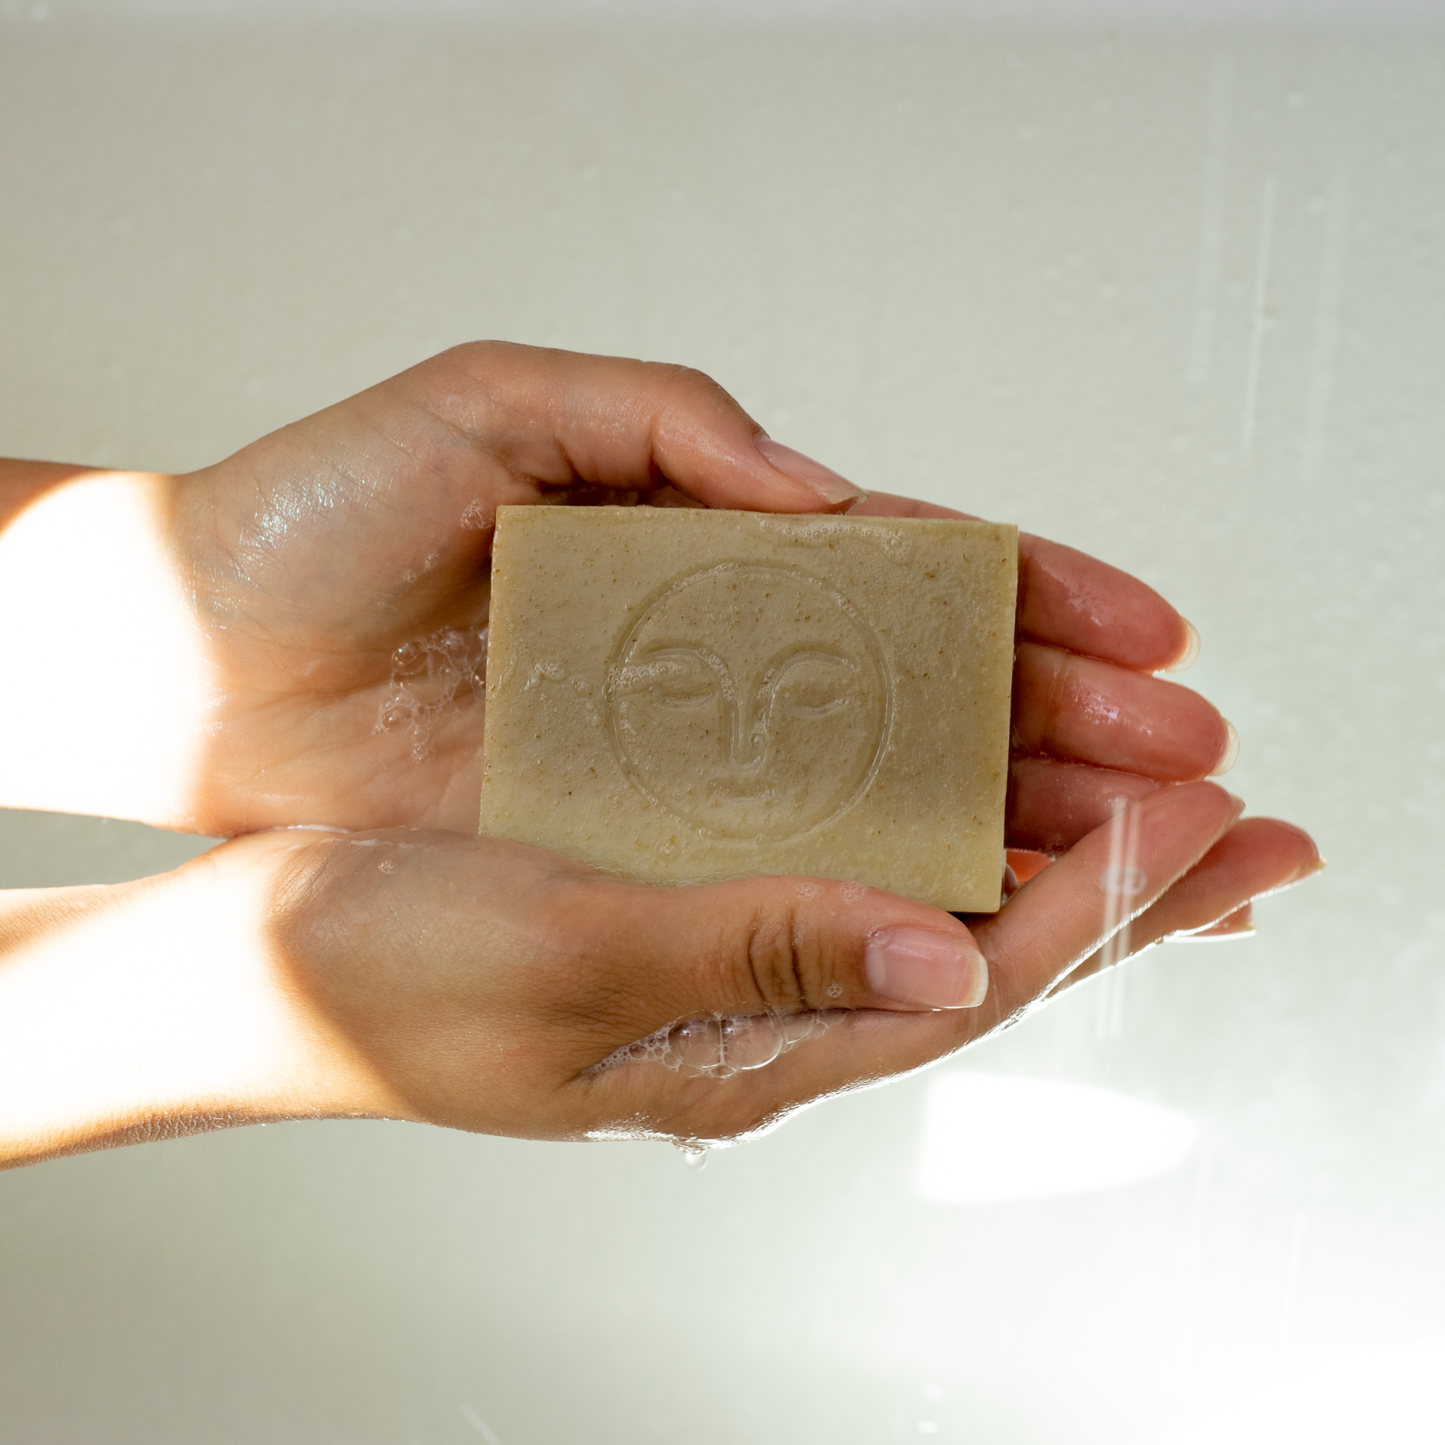 Moon Valley Organics Herbal Soap Bar Hands holding a lathered bar of soap under shower